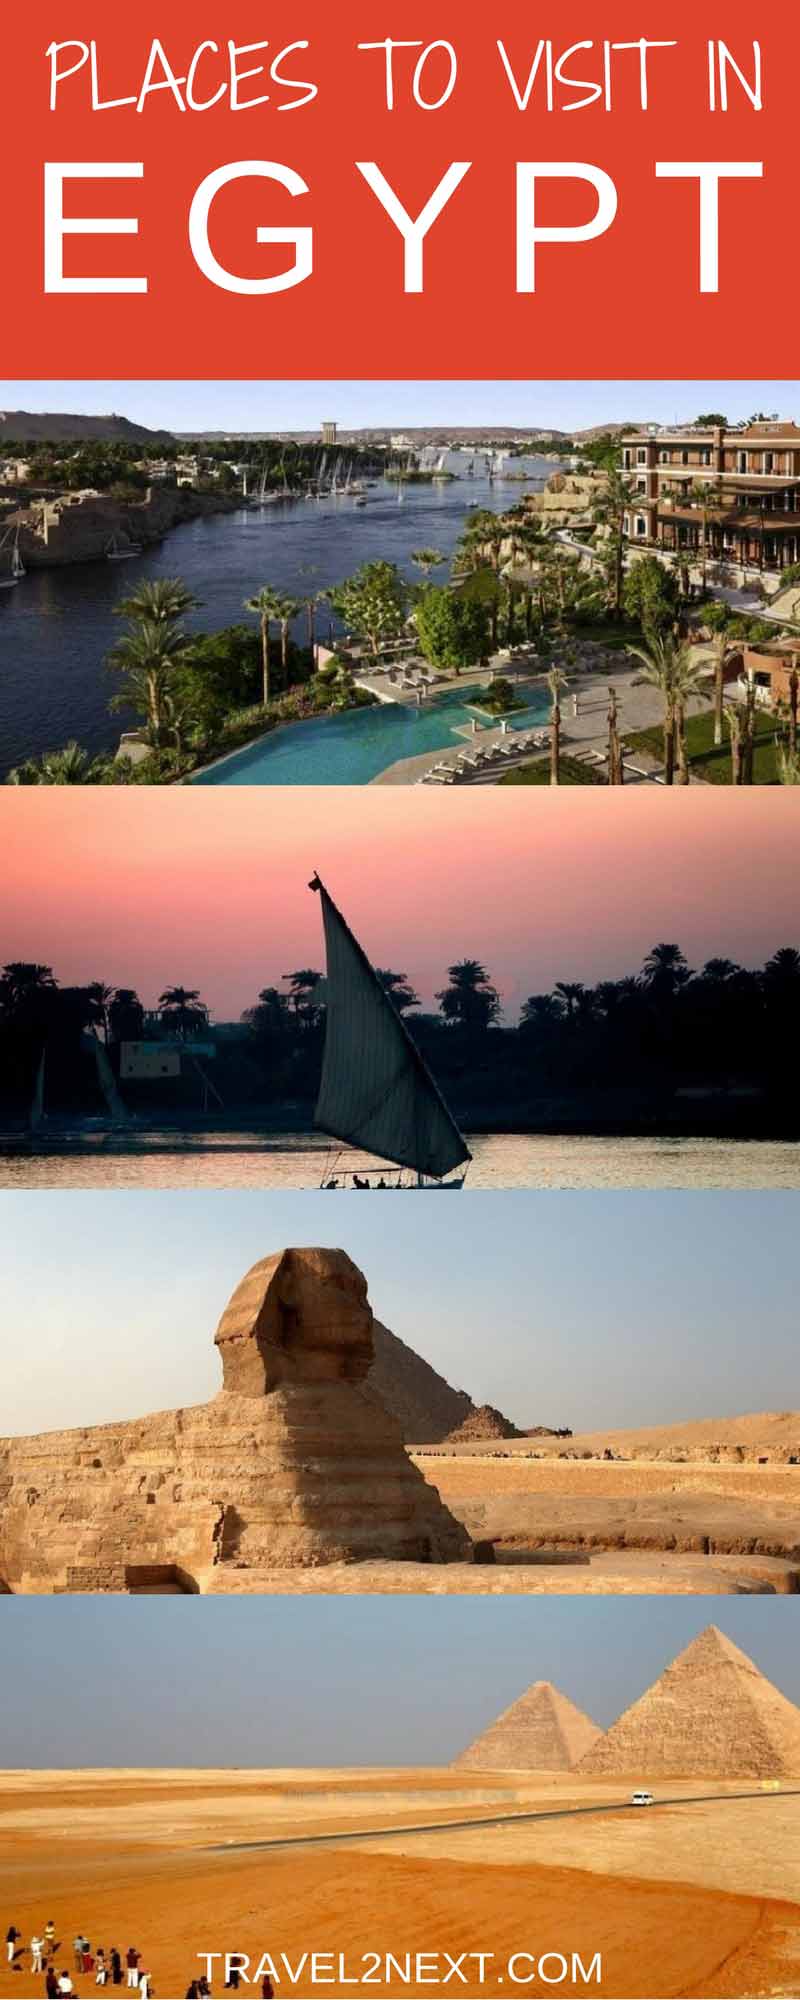 Seven places to visit in Egypt